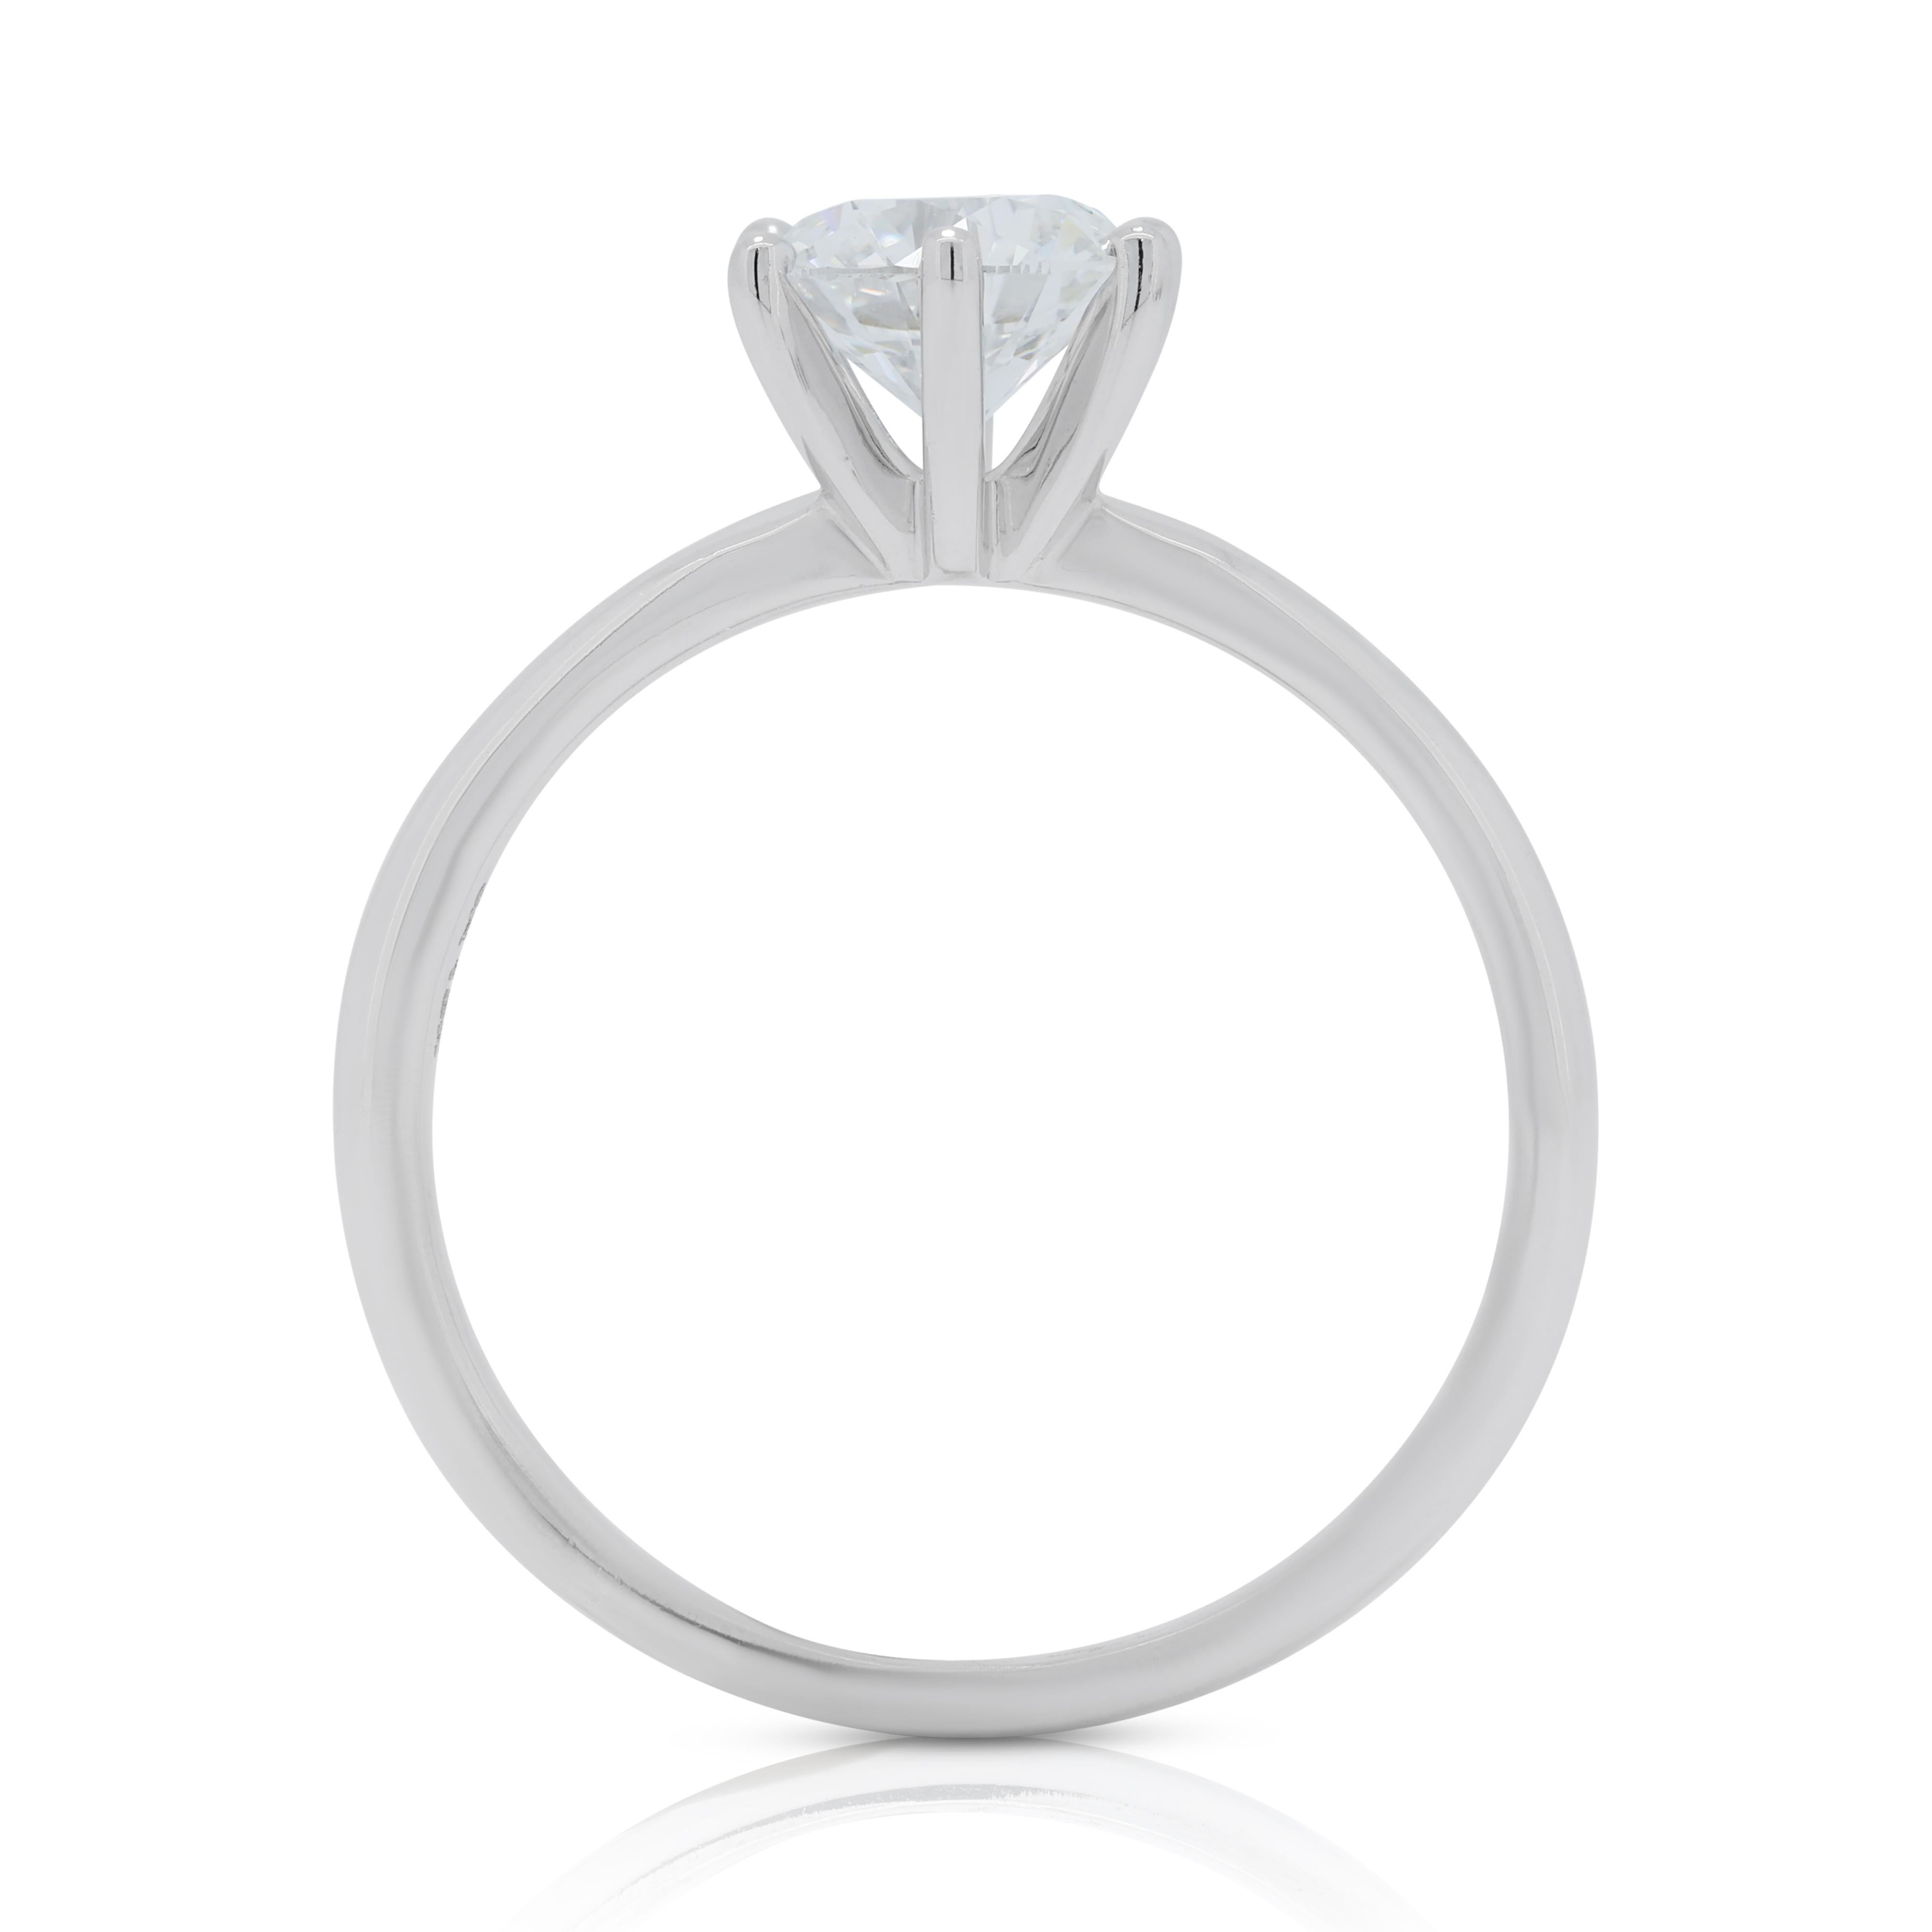 Exquisite 0.90ct Diamond Solitaire Ring in 18K White Gold  For Sale 2